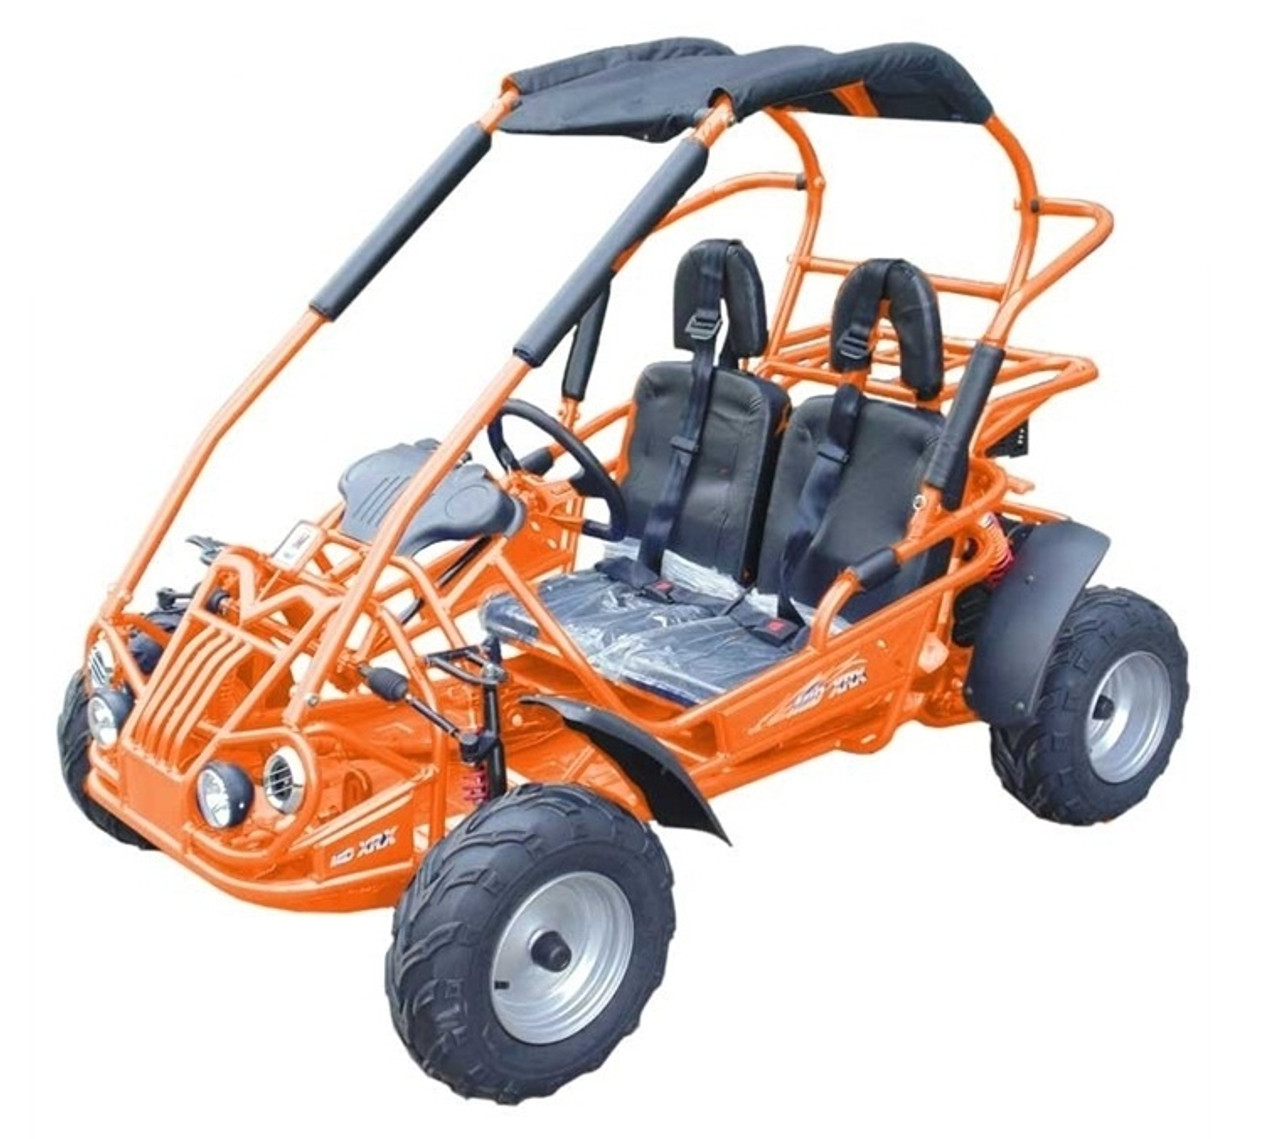 TrailMaster Mid XRX, 4-Stroke, Air Cooled, Single Cylinder GoKart, Carb Approved - Fully Assembled and Tested